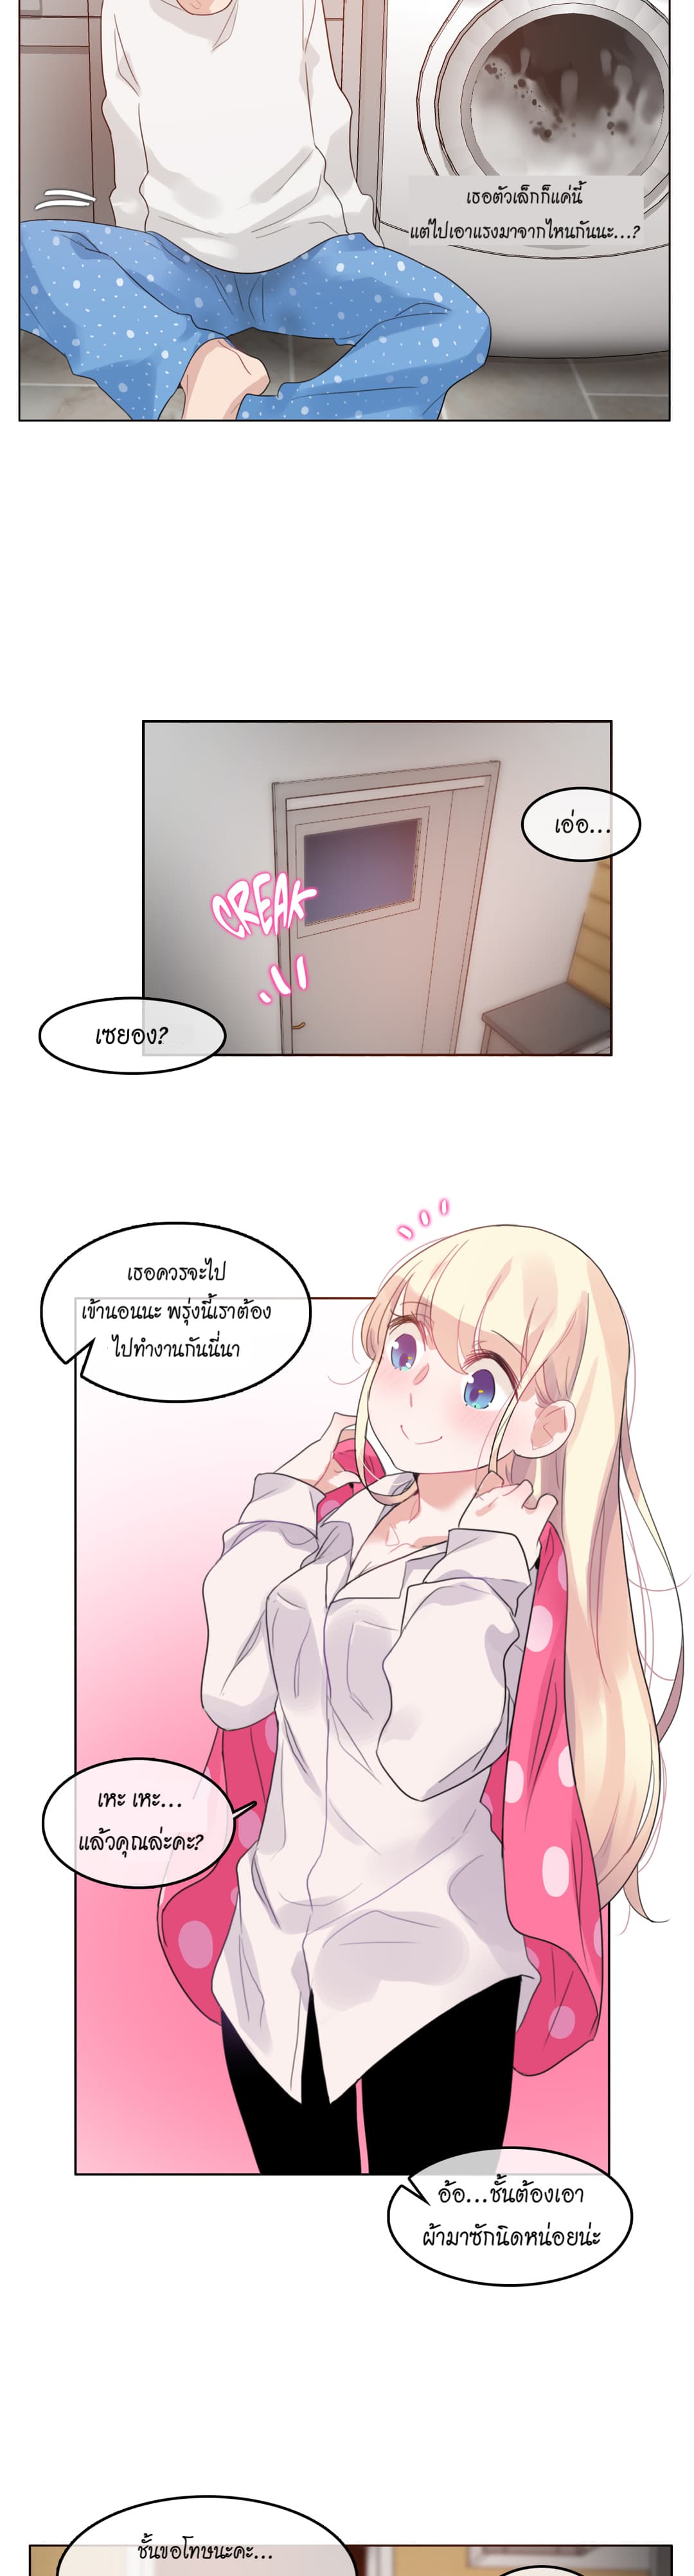 A Pervert’s Daily Life 40 (16)